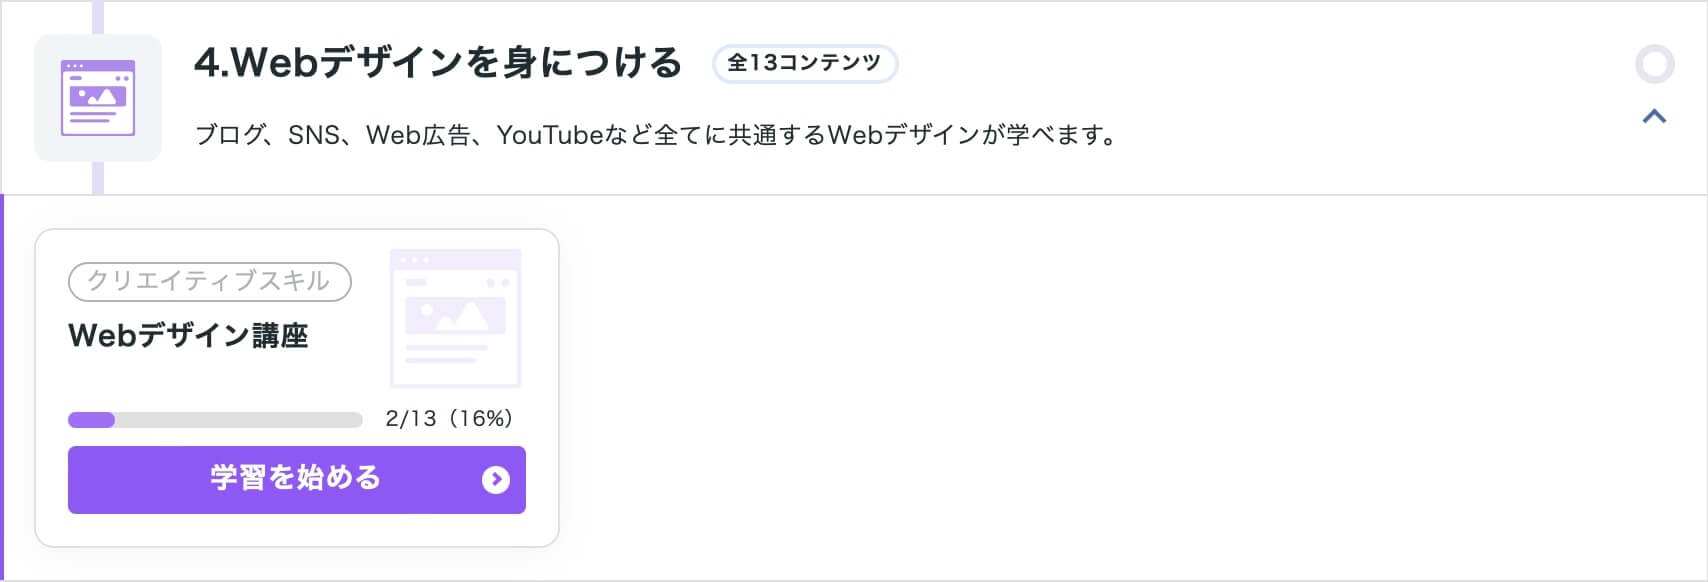 withマーケのwebデザイン講座